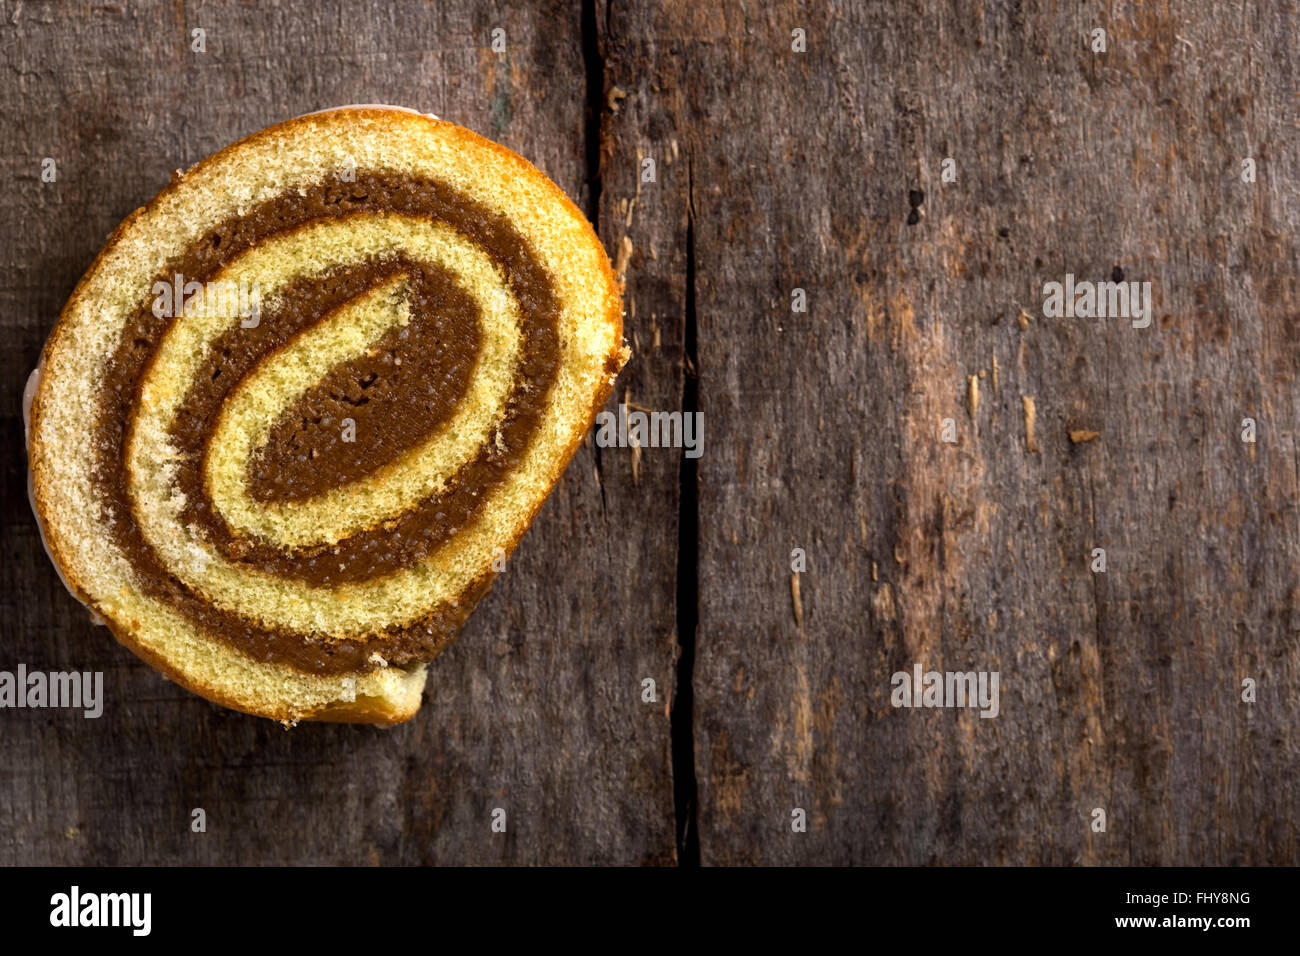 Chocolate roll cake with caramel and vanilla sauce over wooden background with copy space Stock Photo